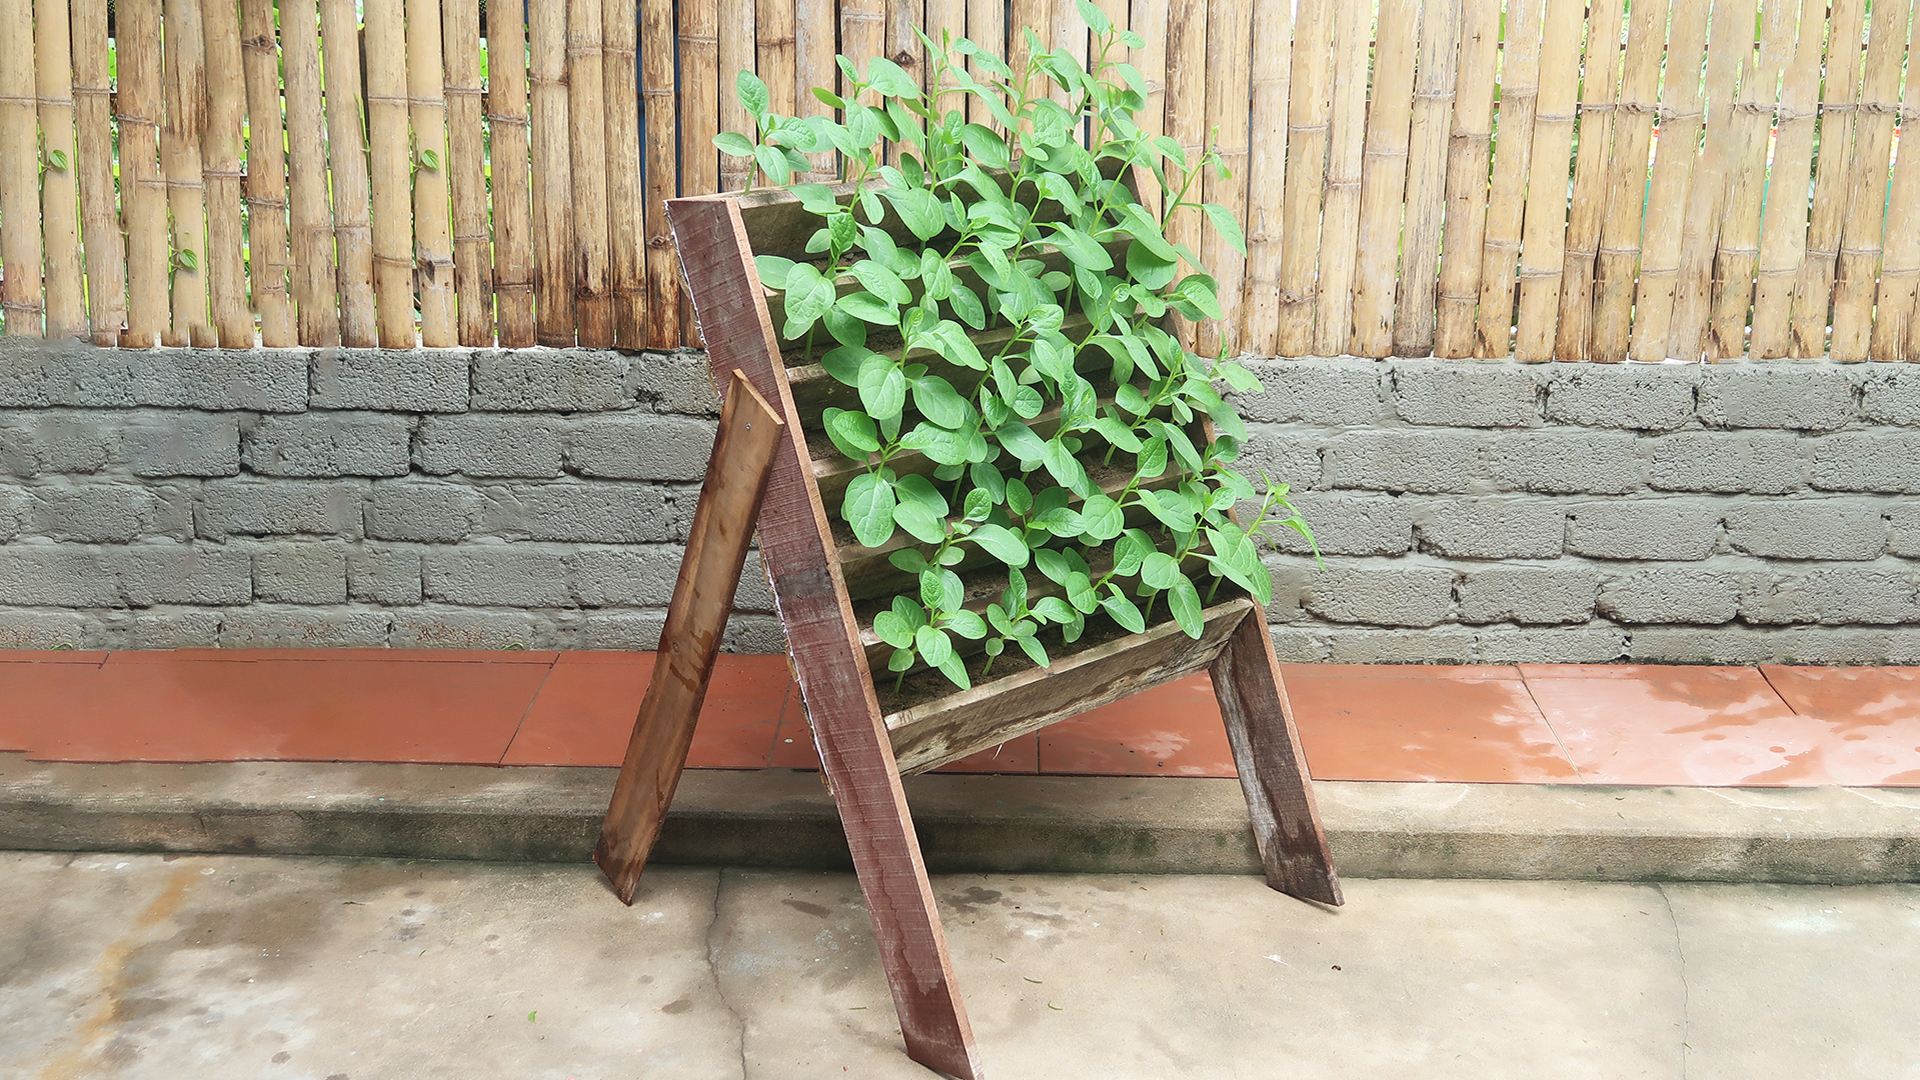 Instructions for vertical gardening to grow spinach at home